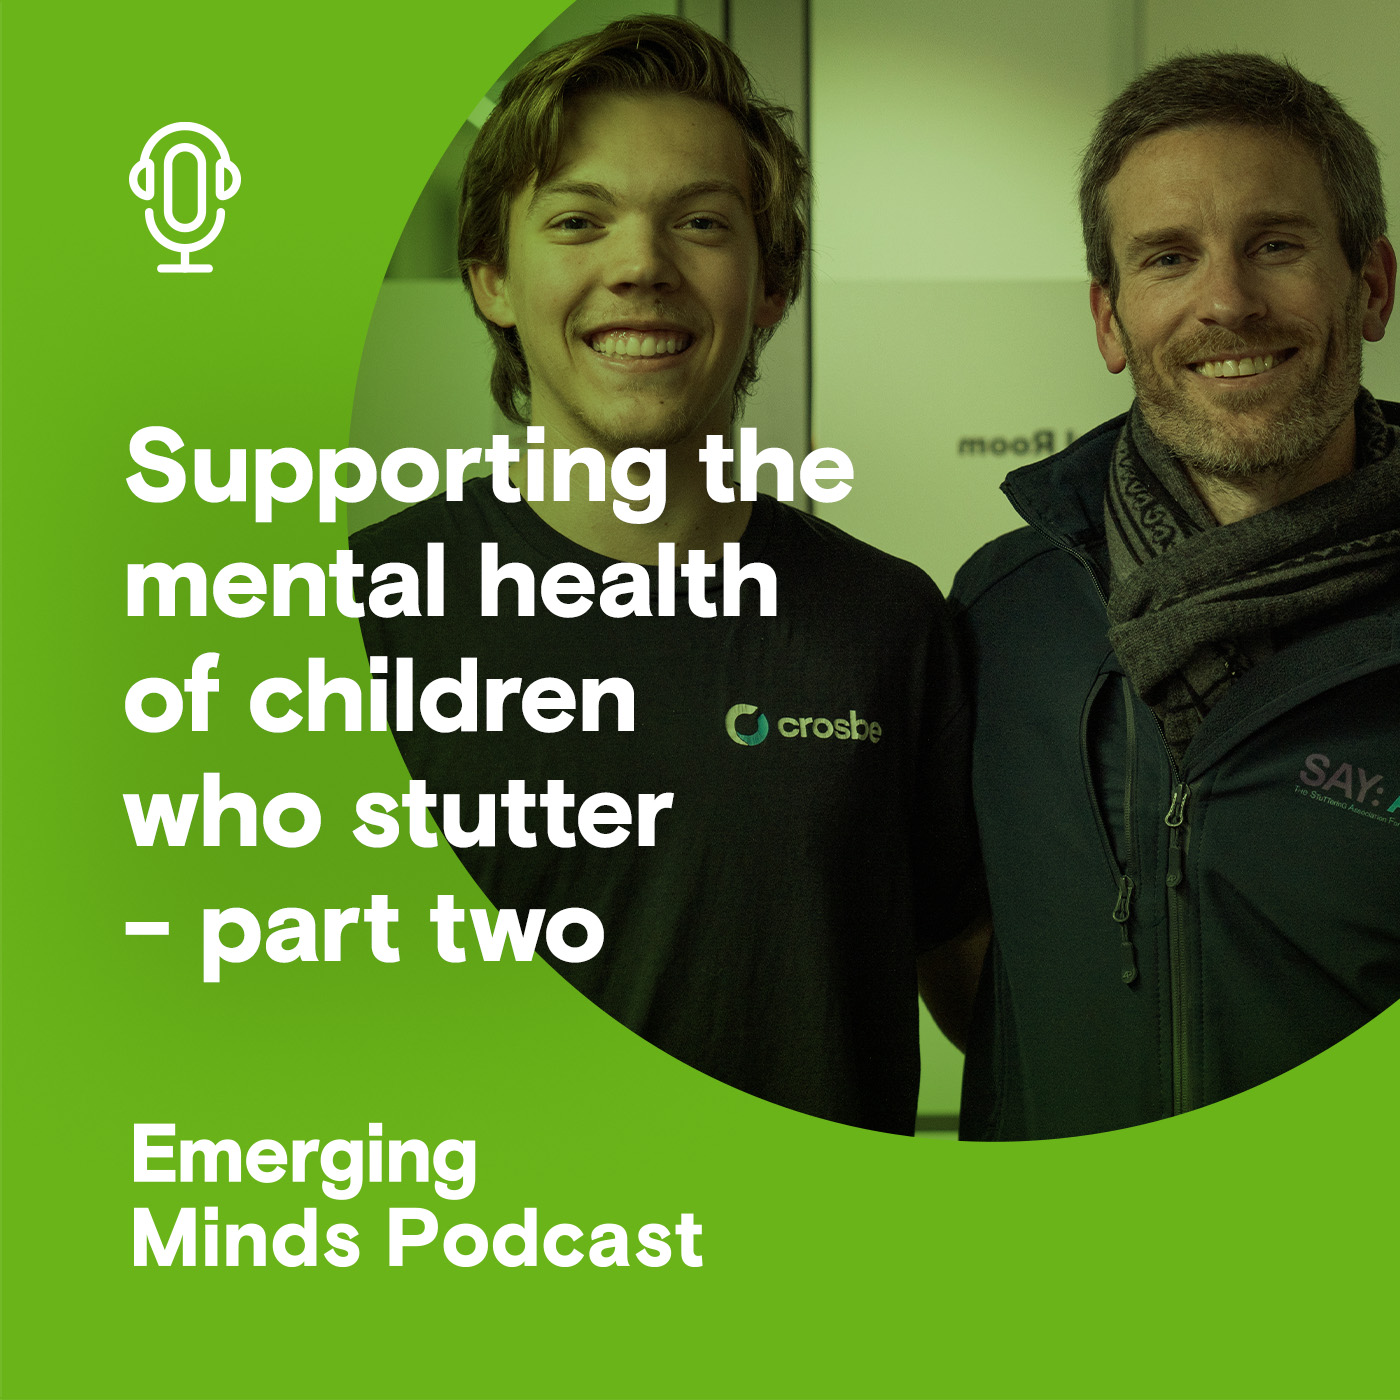 Supporting the mental health of children who stutter - part two